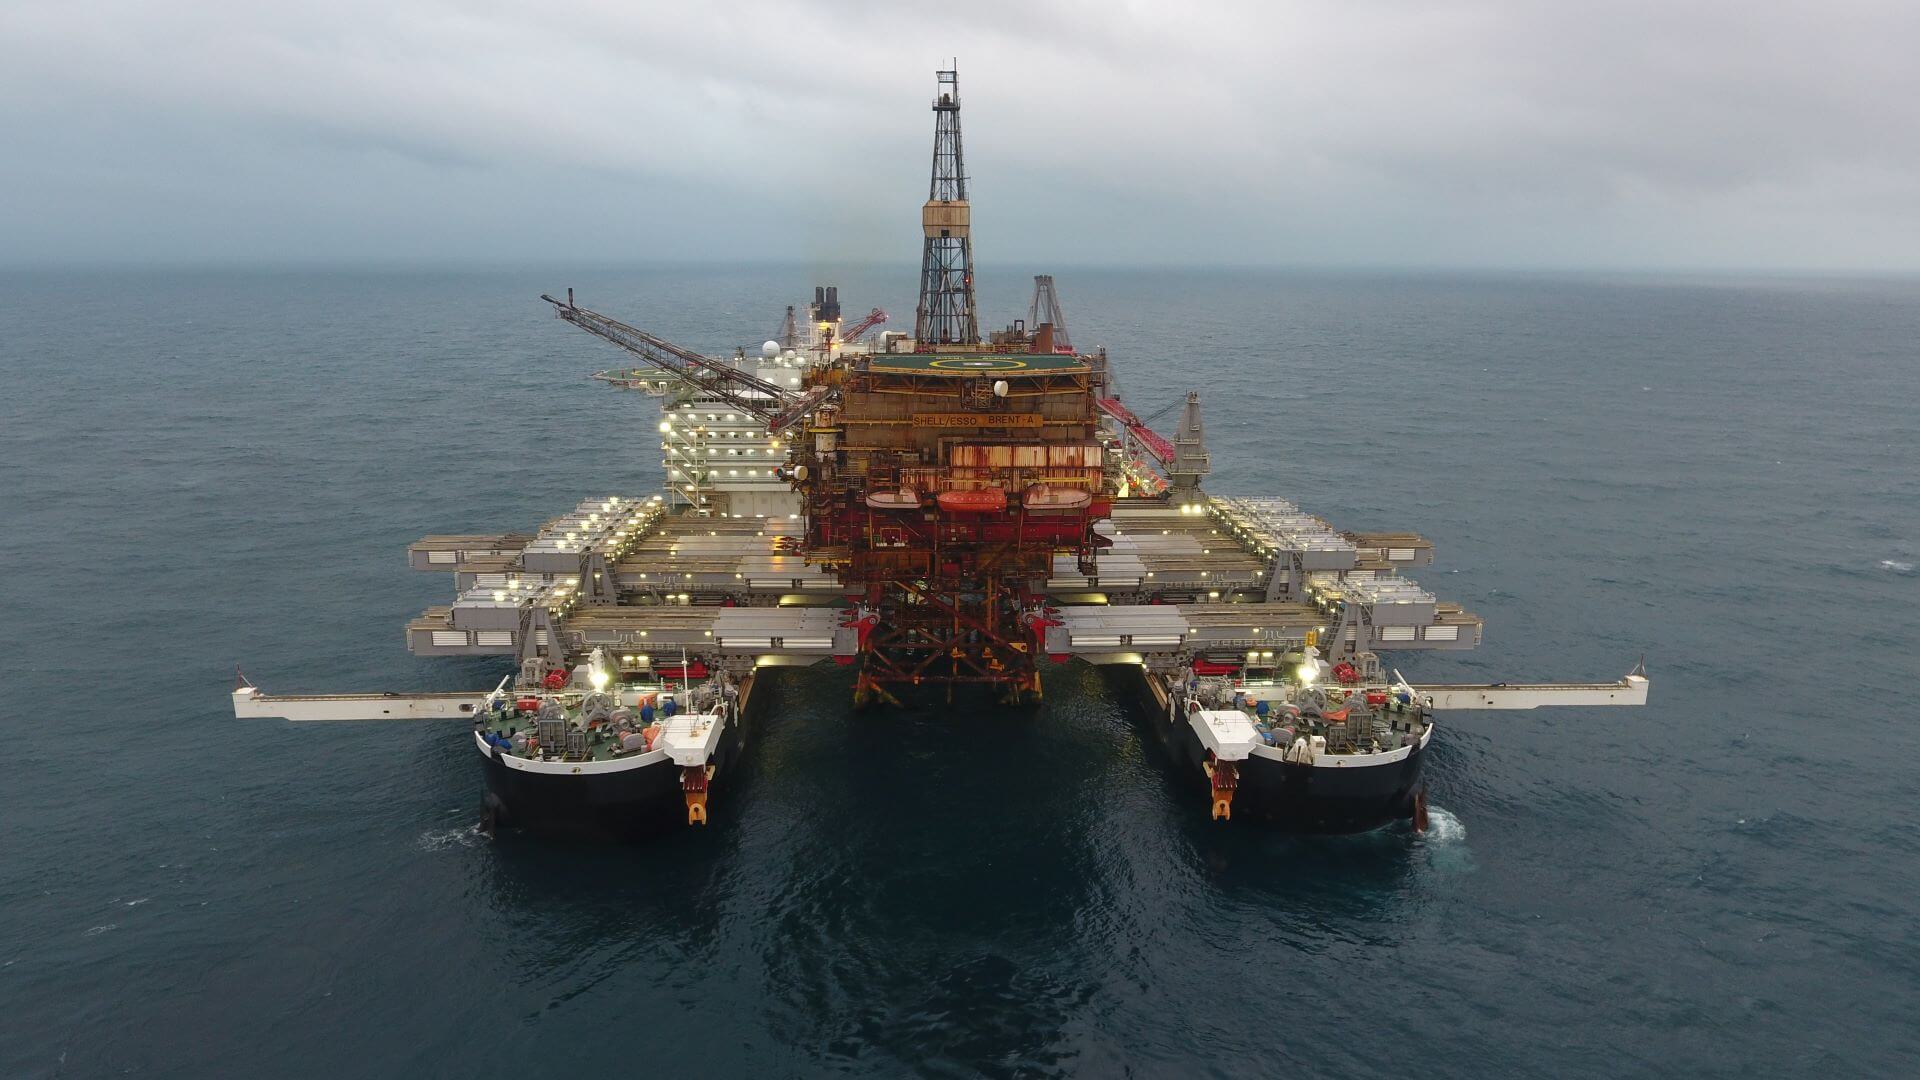 Lifting of Alpha field topsides